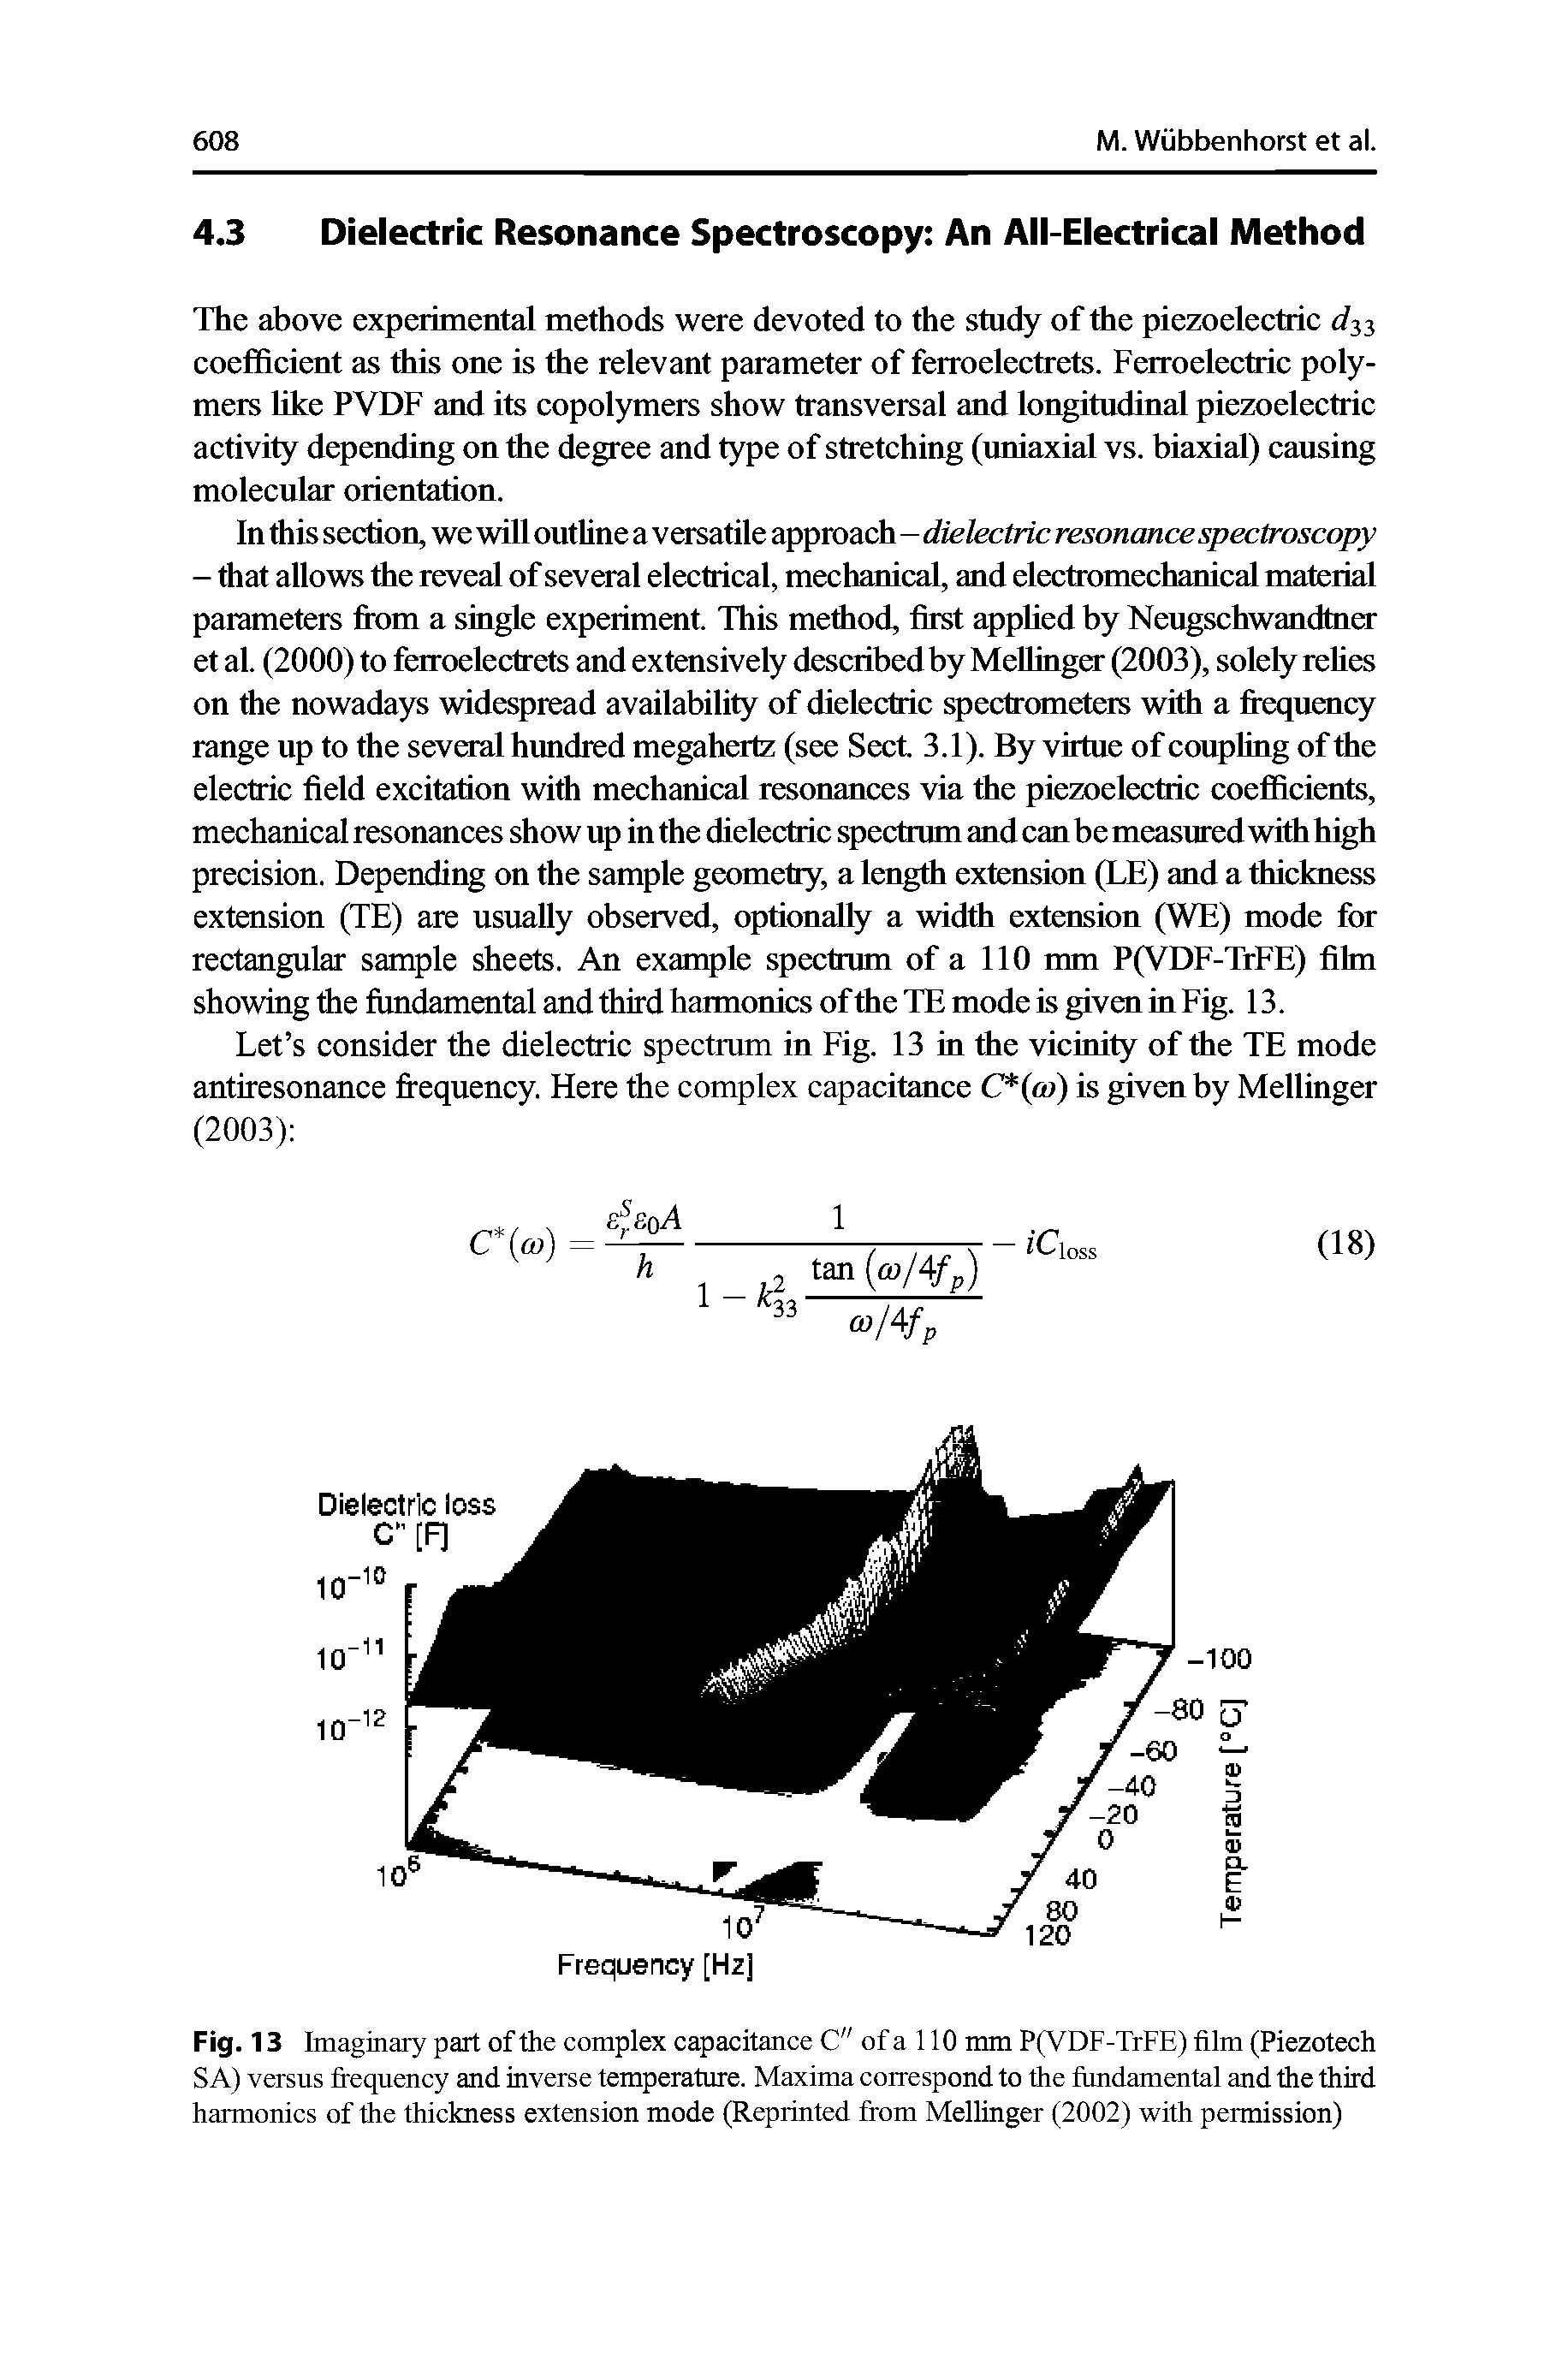 Fig. 13 Imaginary part of the complex capacitance C" of a 110 mm P(VDF-TrFE) film (Piezotech SA) versus frequency and inverse temperature. Maxima correspond to the fundamental and the third harmonics of the thickness extension mode (Reprinted from Mellinger (2002) with permission)...